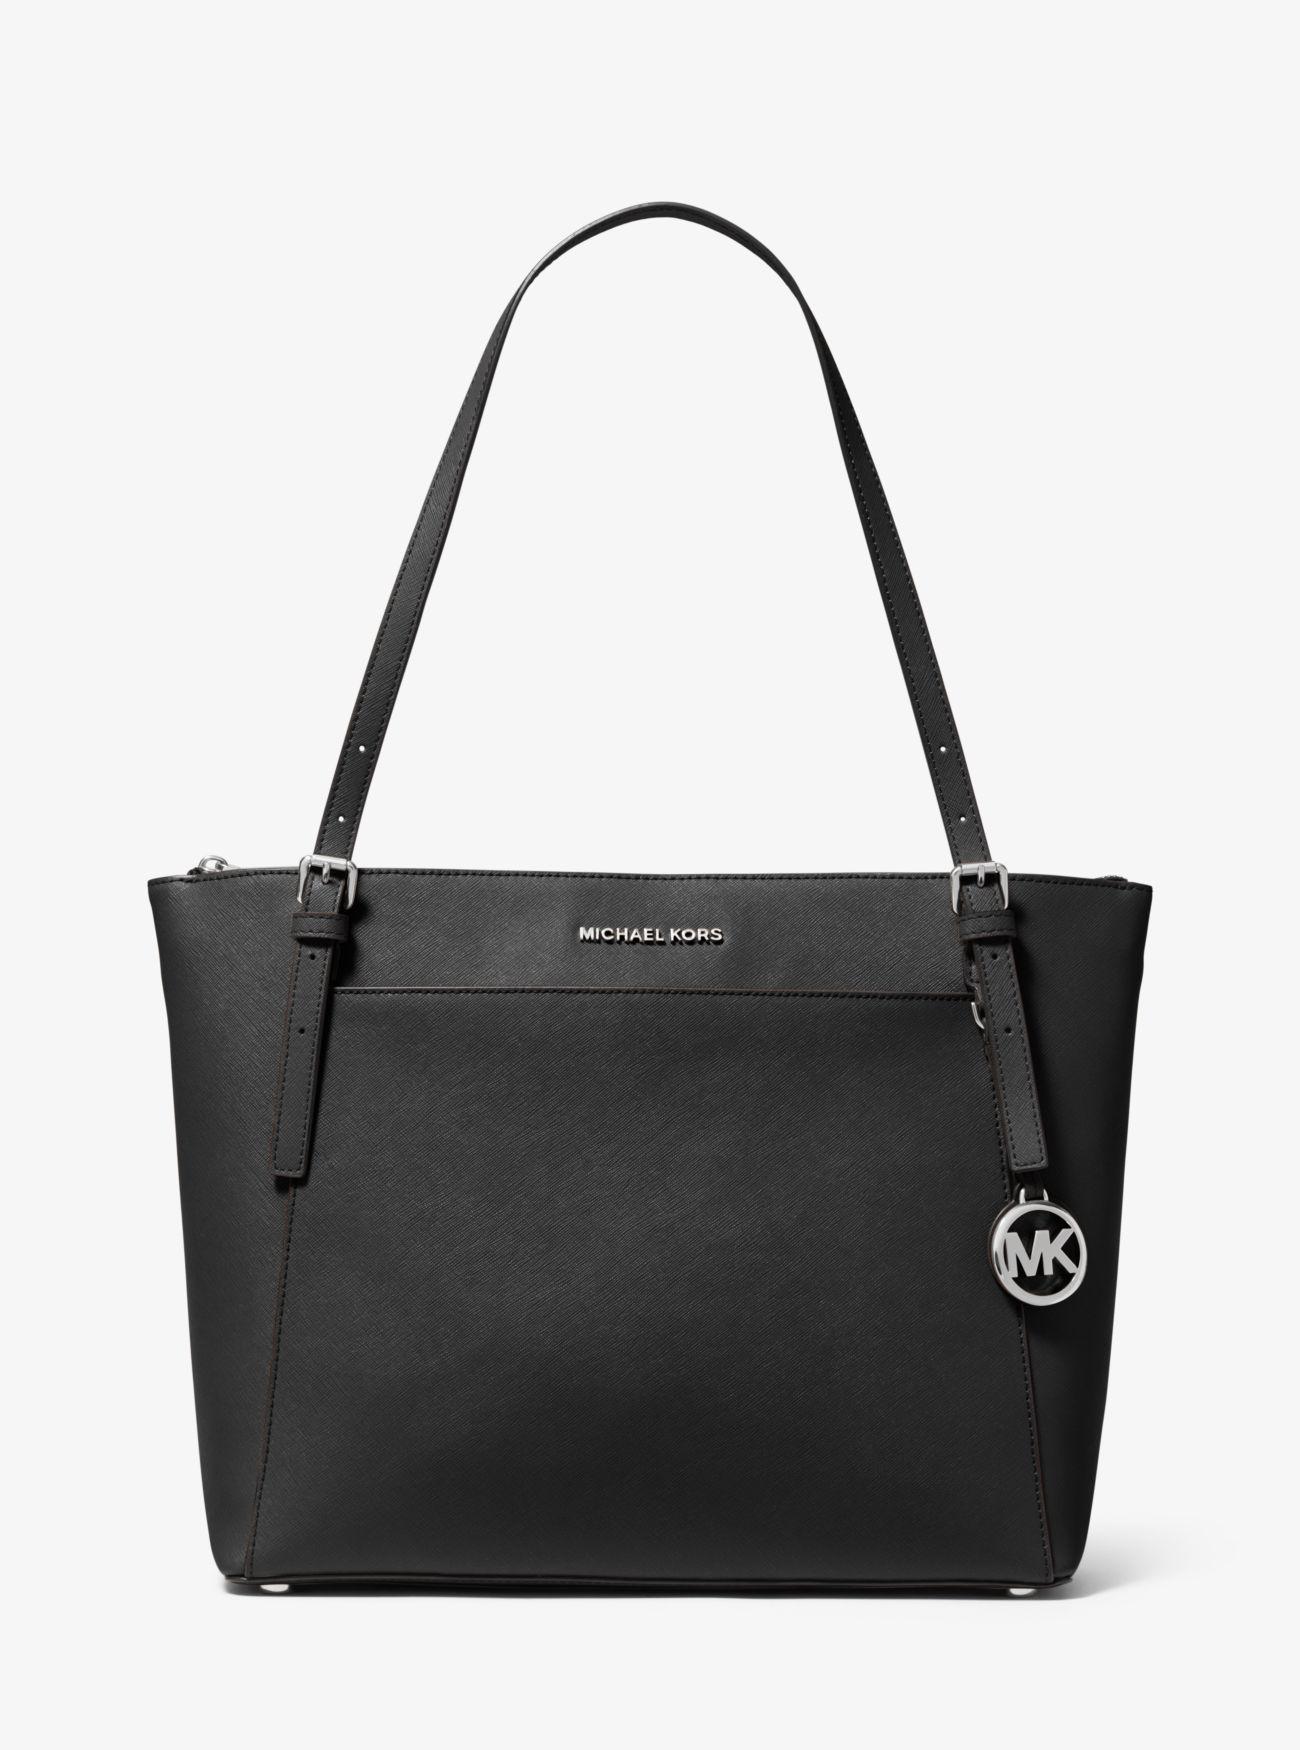 Michael Kors Voyager Large Saffiano Leather Top-zip Tote Bag in Black - Lyst